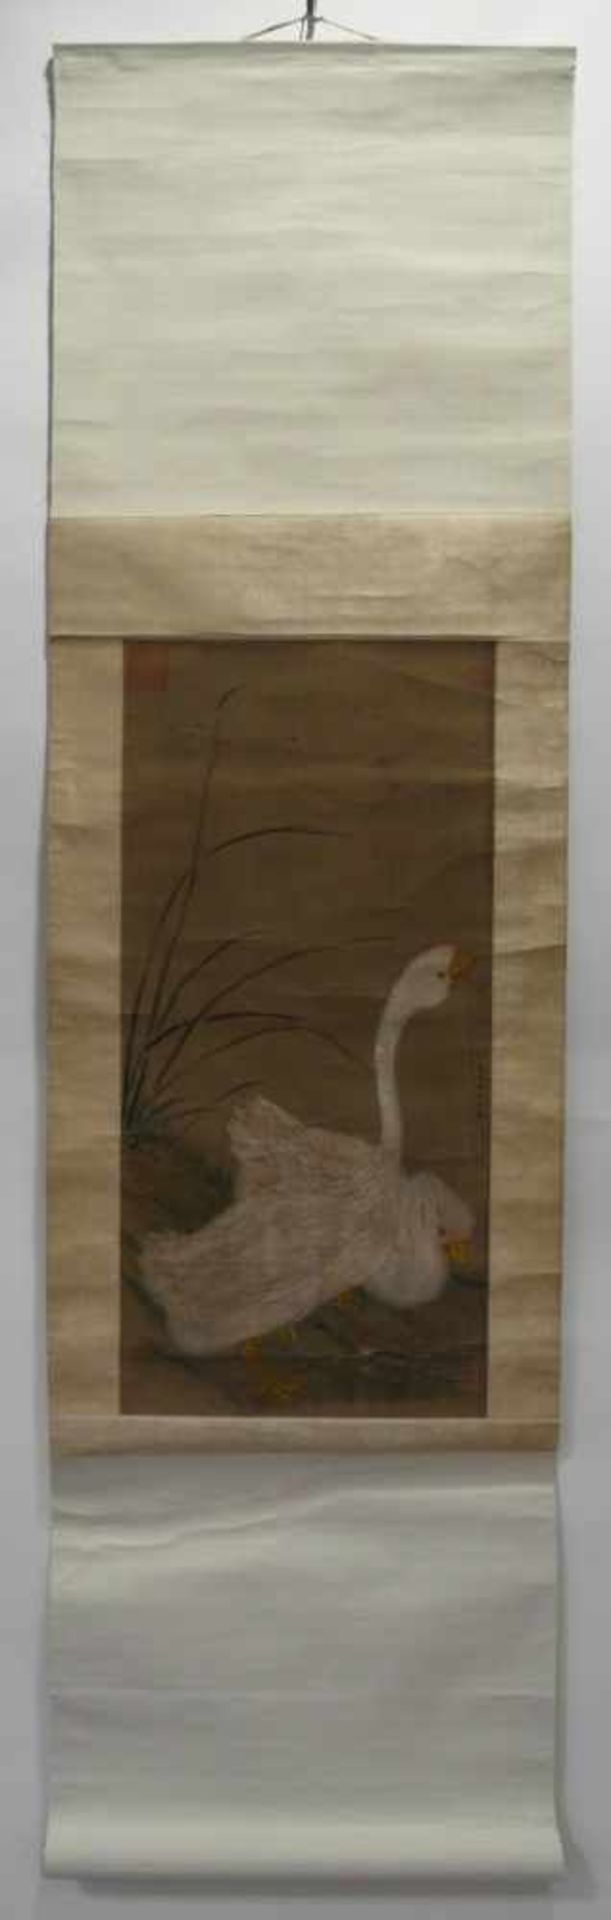 LUO, YIGUI. A pair of ducks in lotus pond. China. Cyclically dated 1934. Ink and colors on paper. - Image 3 of 3